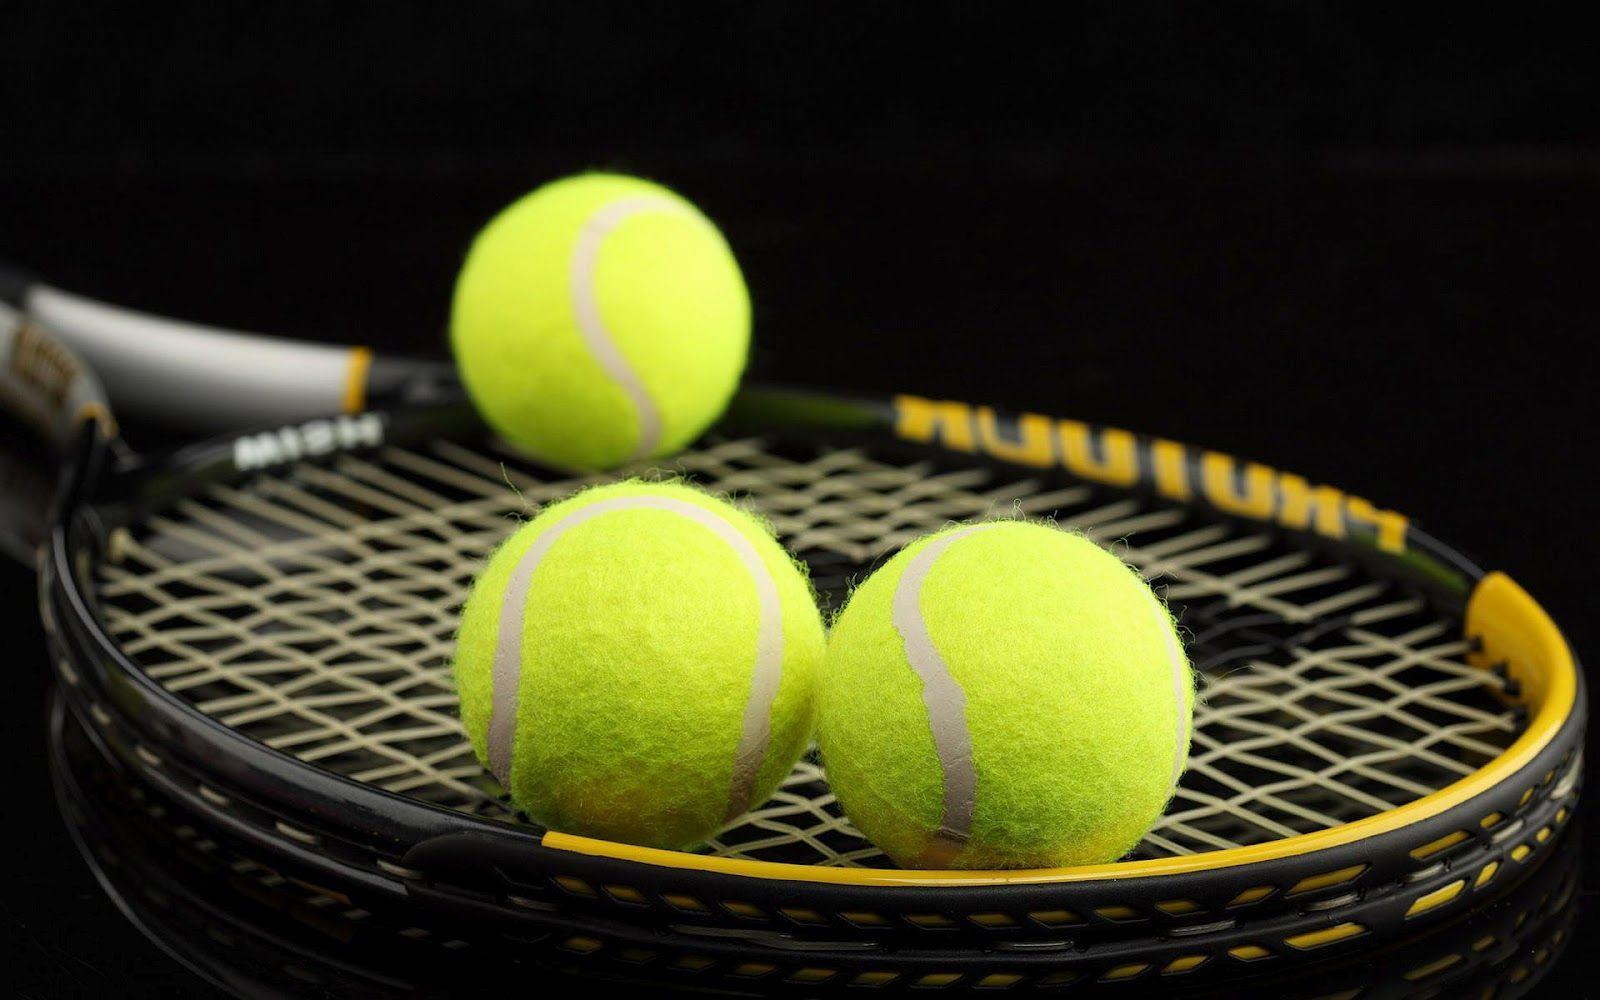 Tennis today 12.08. Schedule, Predictions & Betting Tips